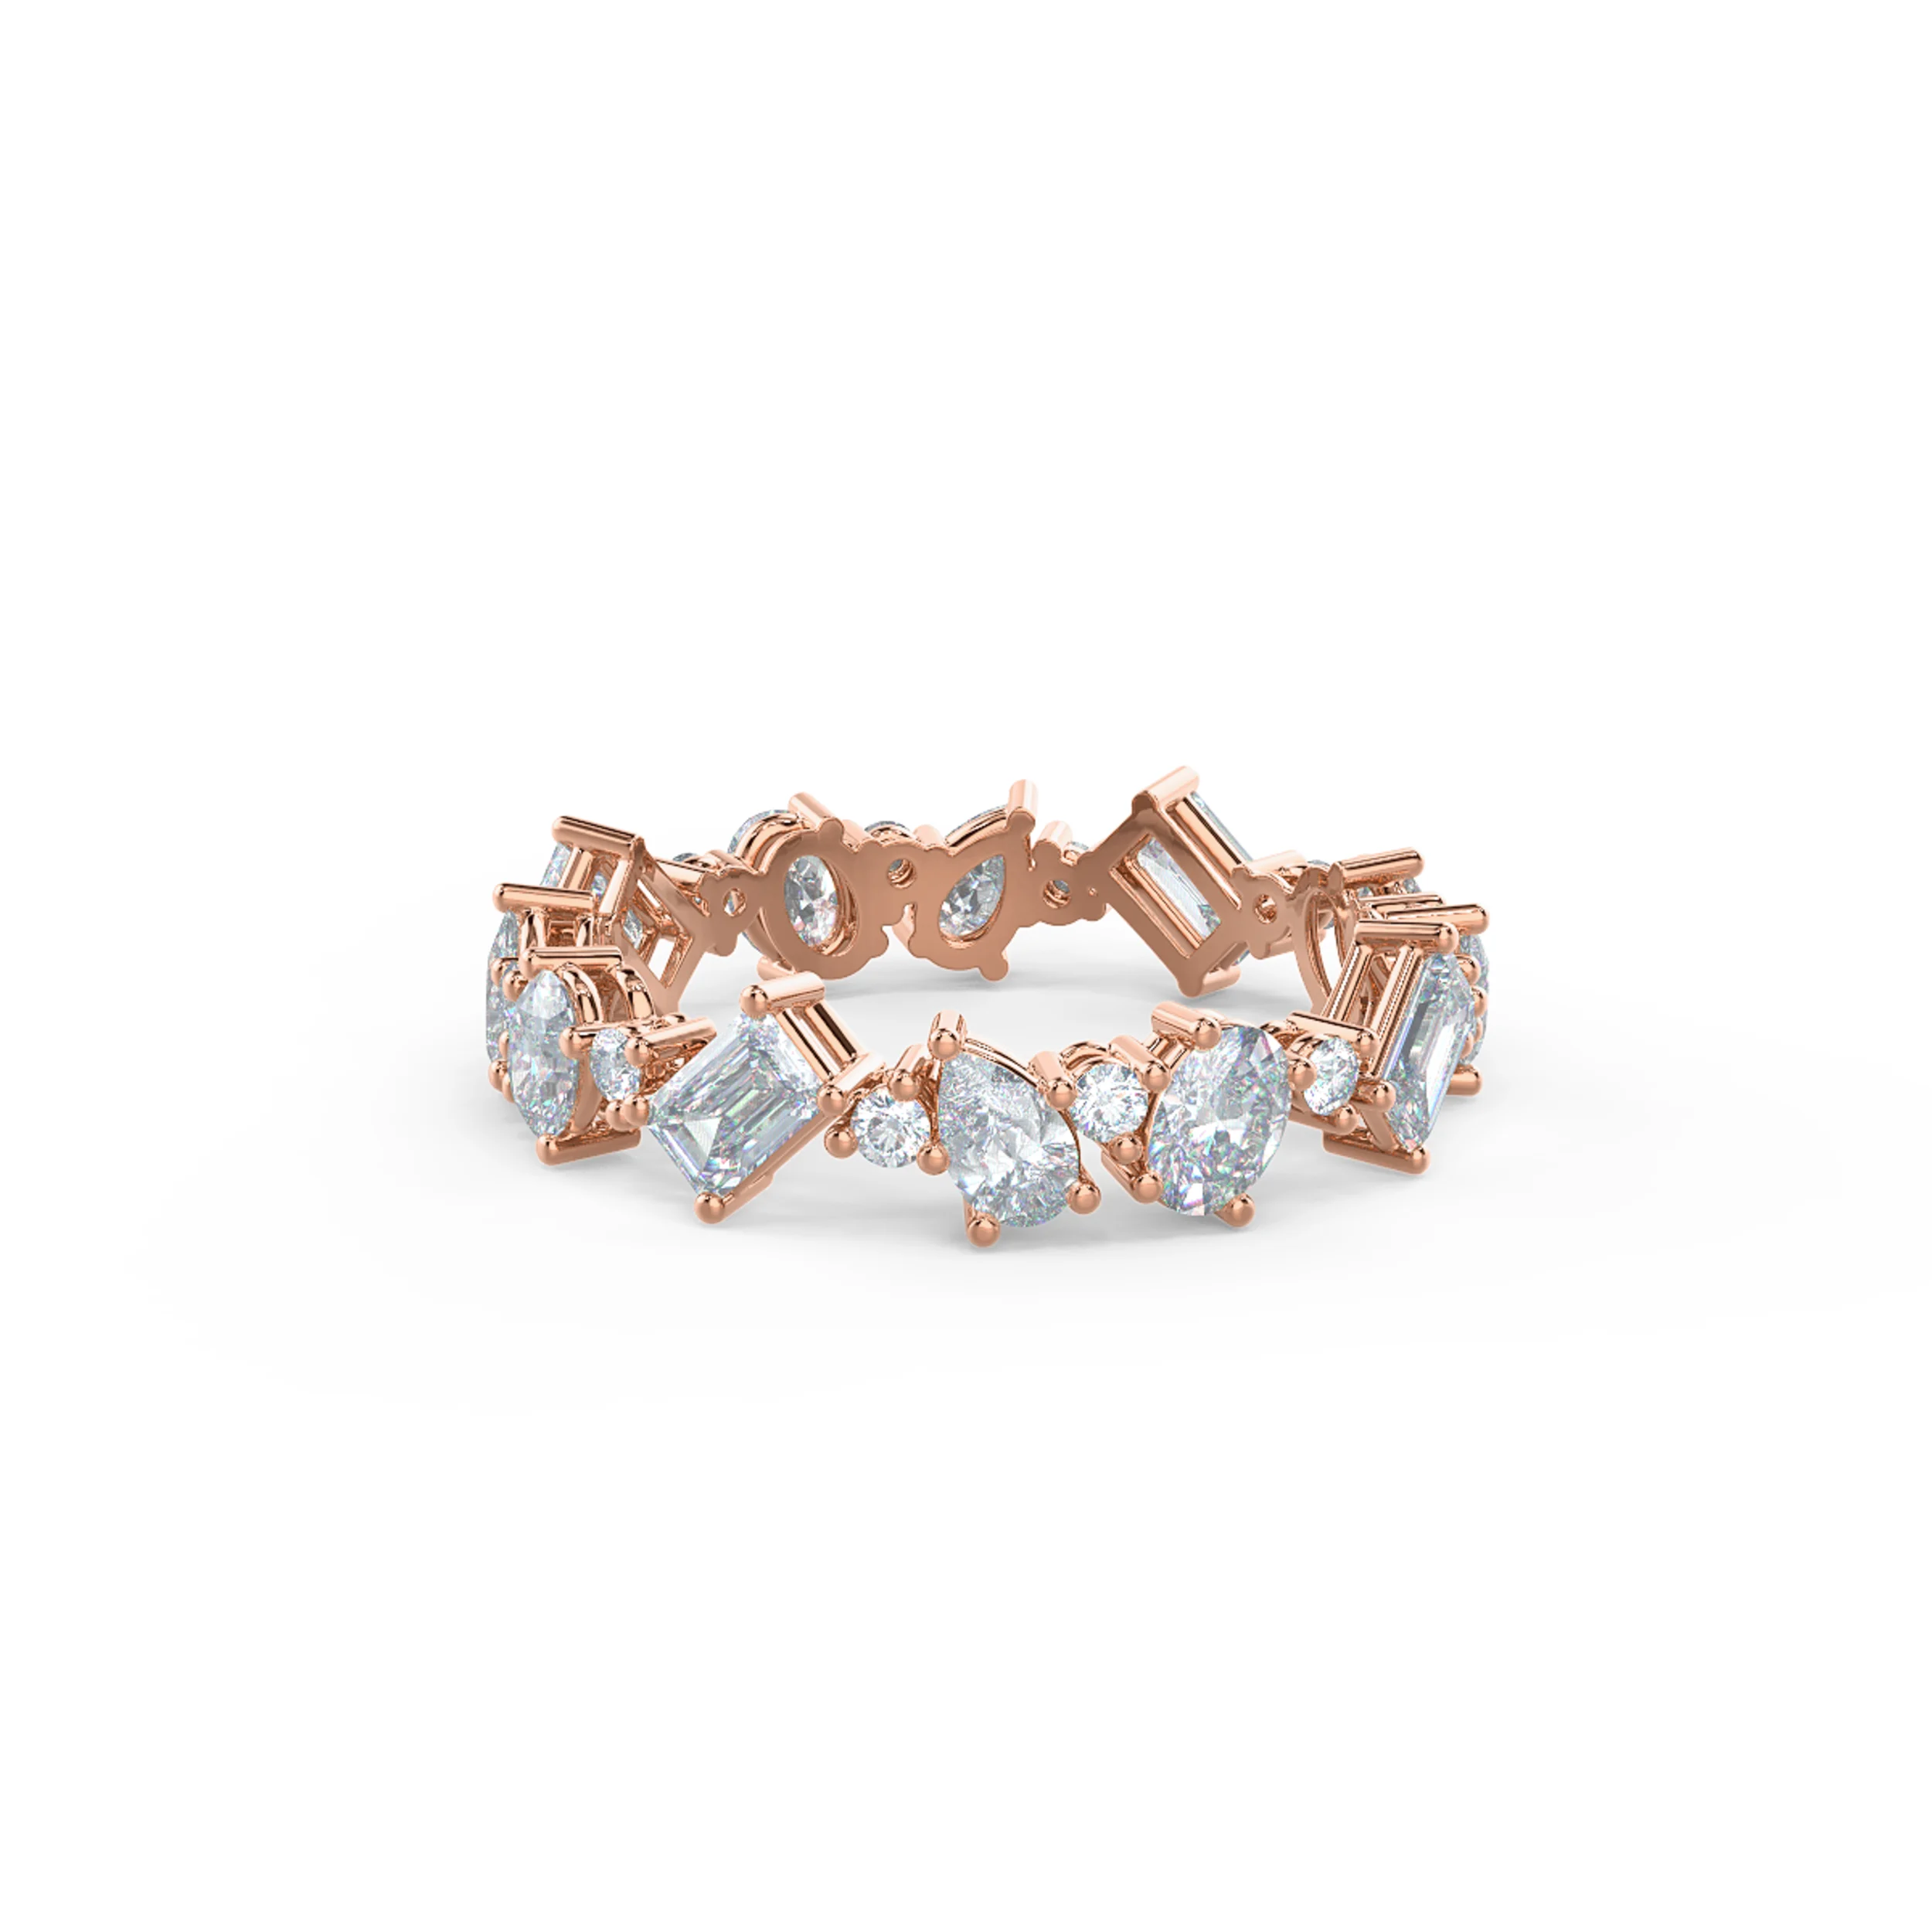 Hand Selected 2.0 Carat Synthetic Diamonds set in 14k Rose Gold Cassie Eternity Band (Main View)